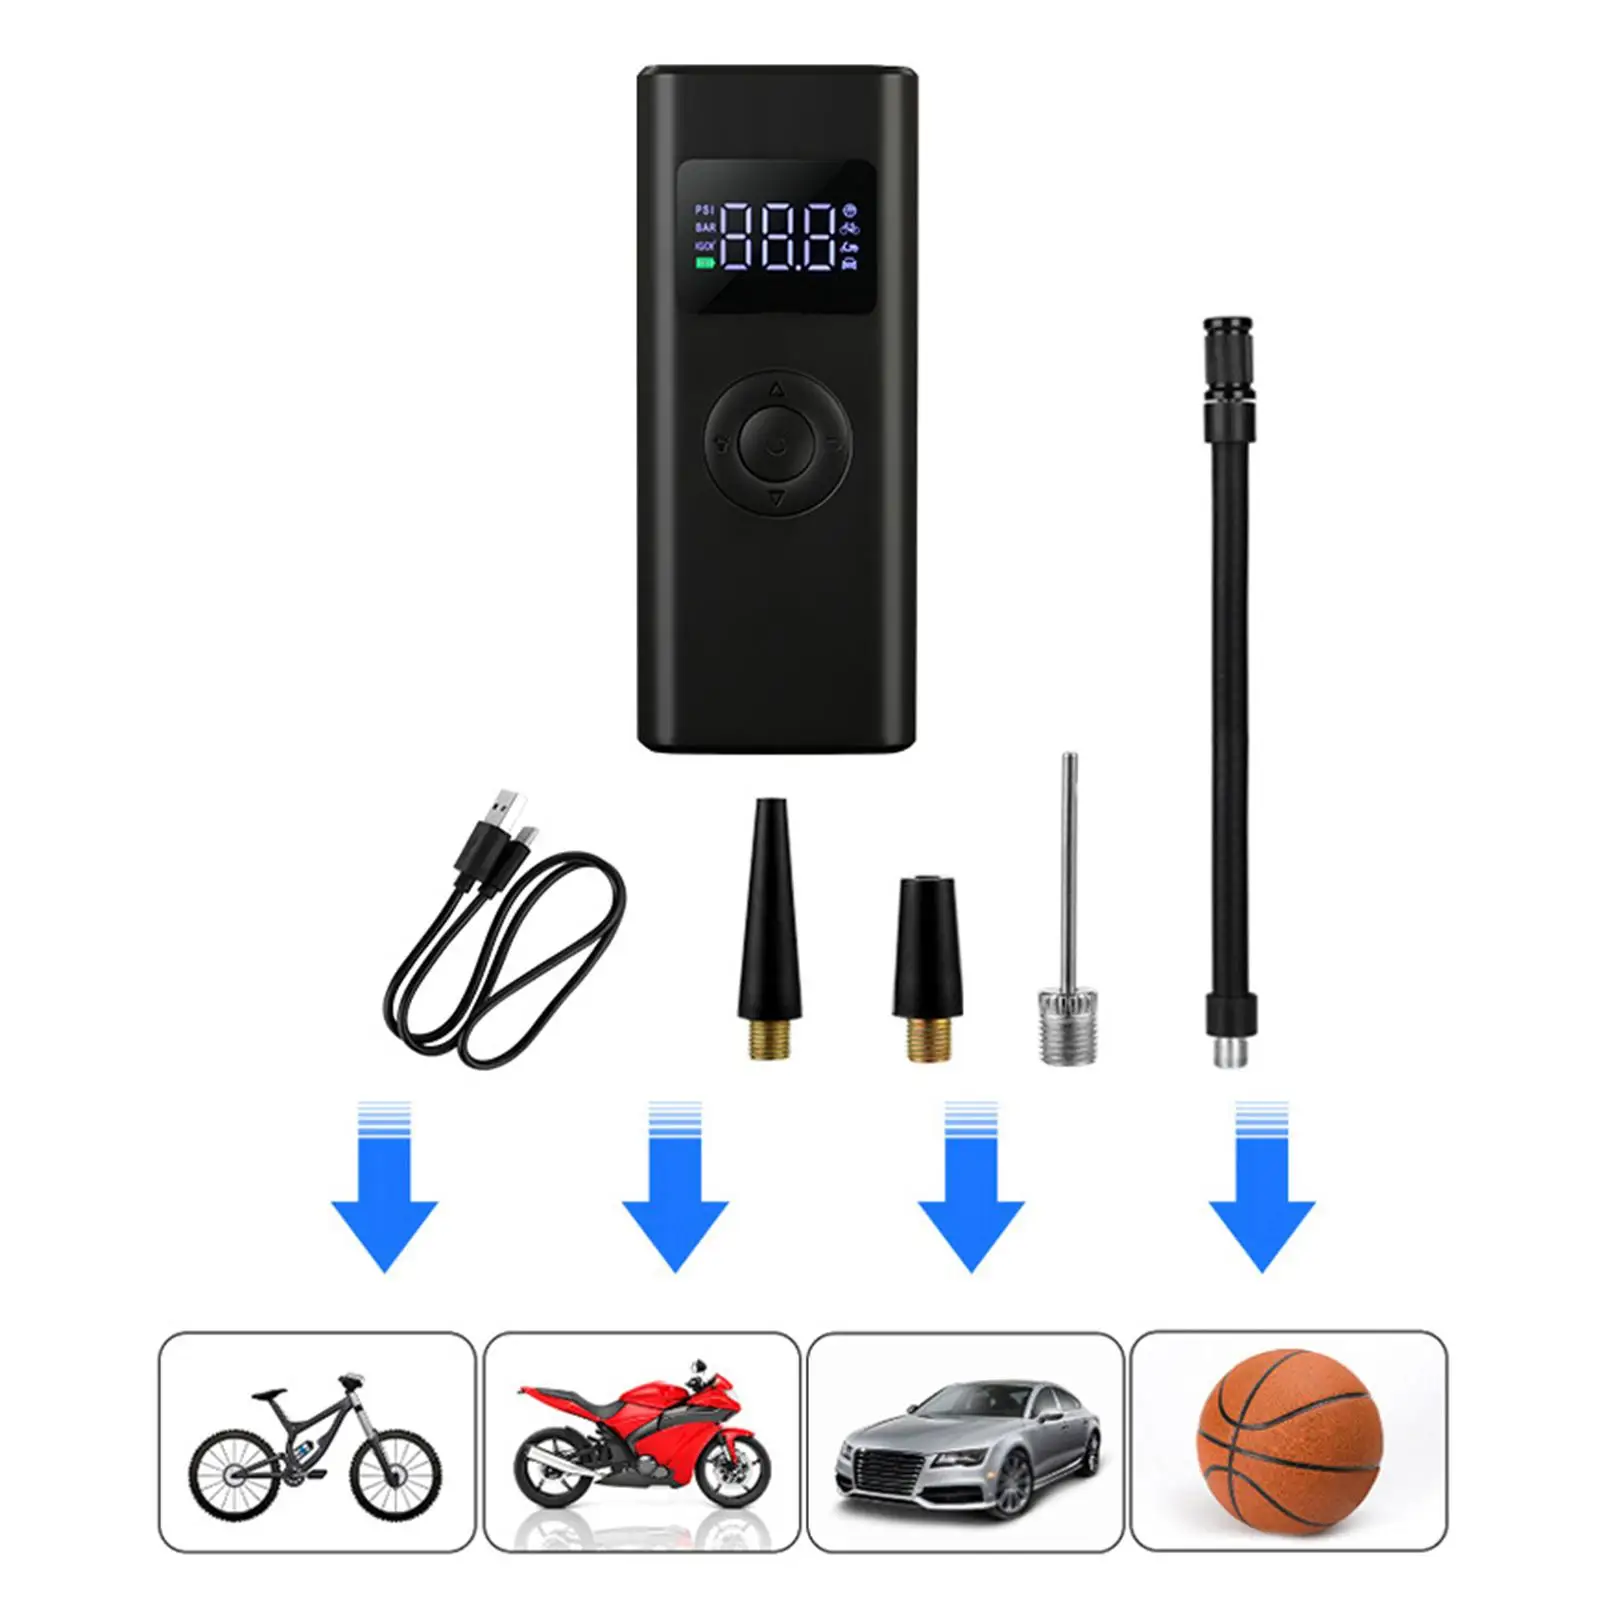 Handheld Air Pump Rechargeable Tire Pump for Cars, Bicycles, Football Balls,